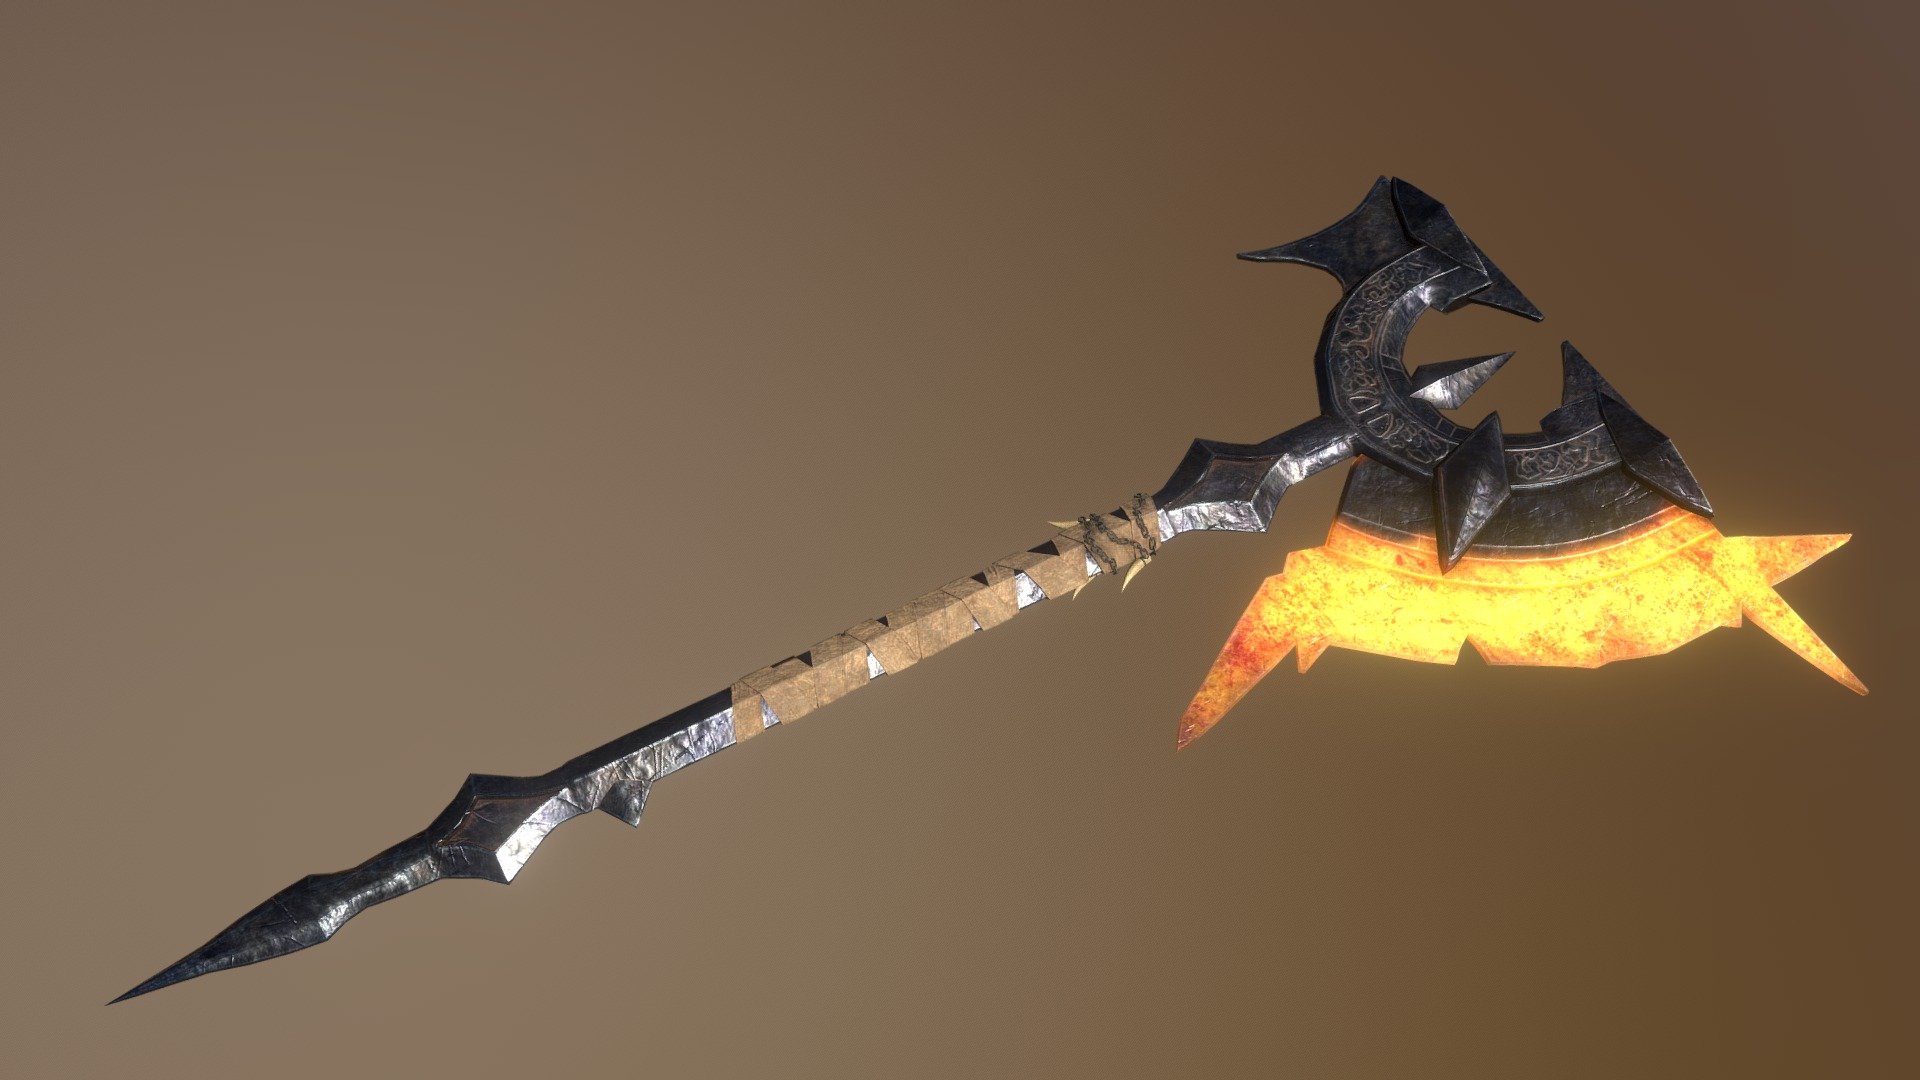 Modeled after the Concepts made by Max Davenport: https://www.artstation.com/artwork/zW3Ew

I had this Concept sitting in my reference folder forever and I finally decided to model it! - Fantasy Axe - 3D model by Marcel Hansen (@ma.hansen) 3d model